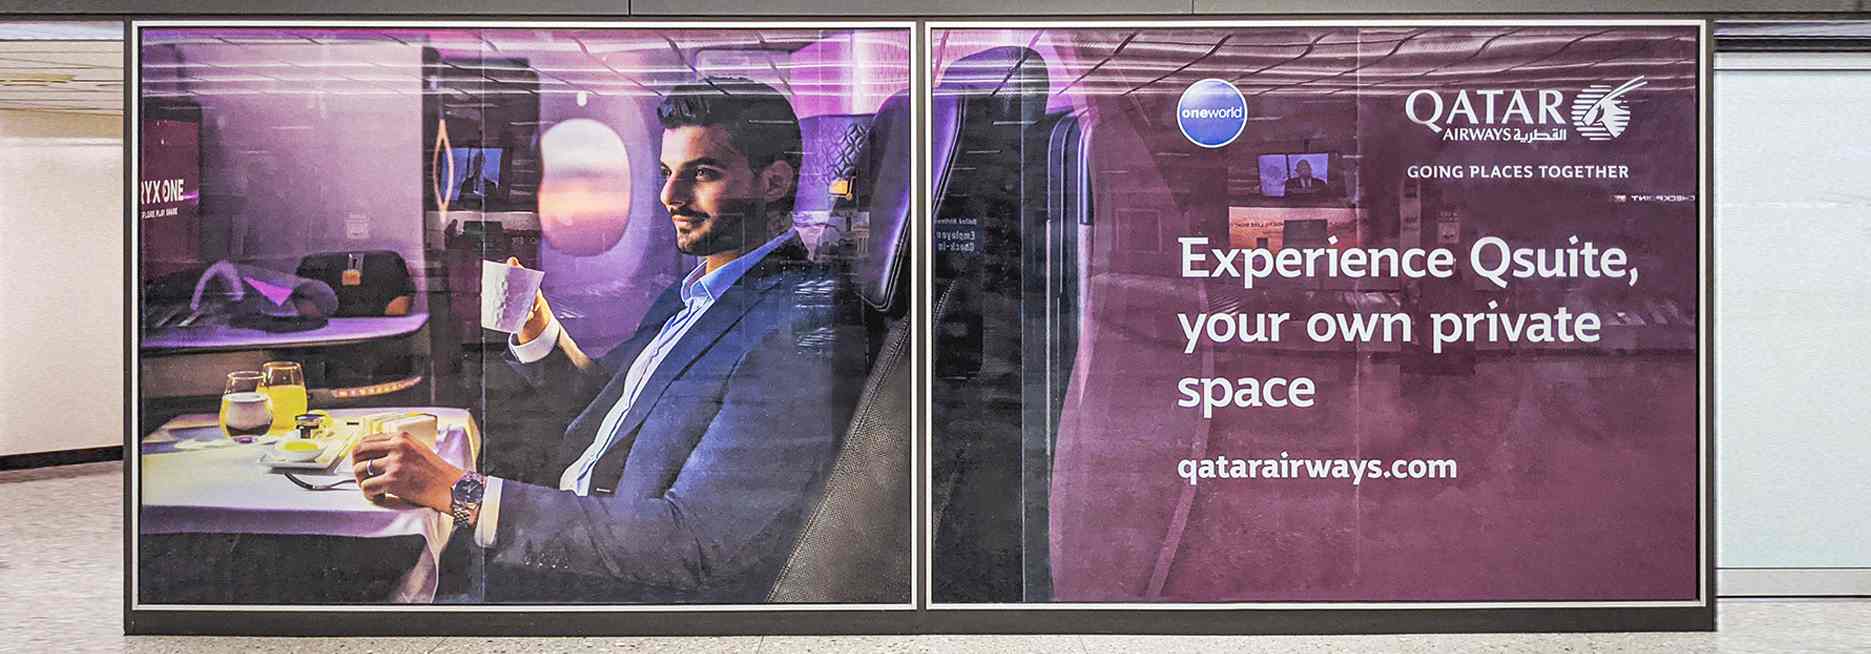 Qatar Airways feature wall design in purple displaying the company's motto